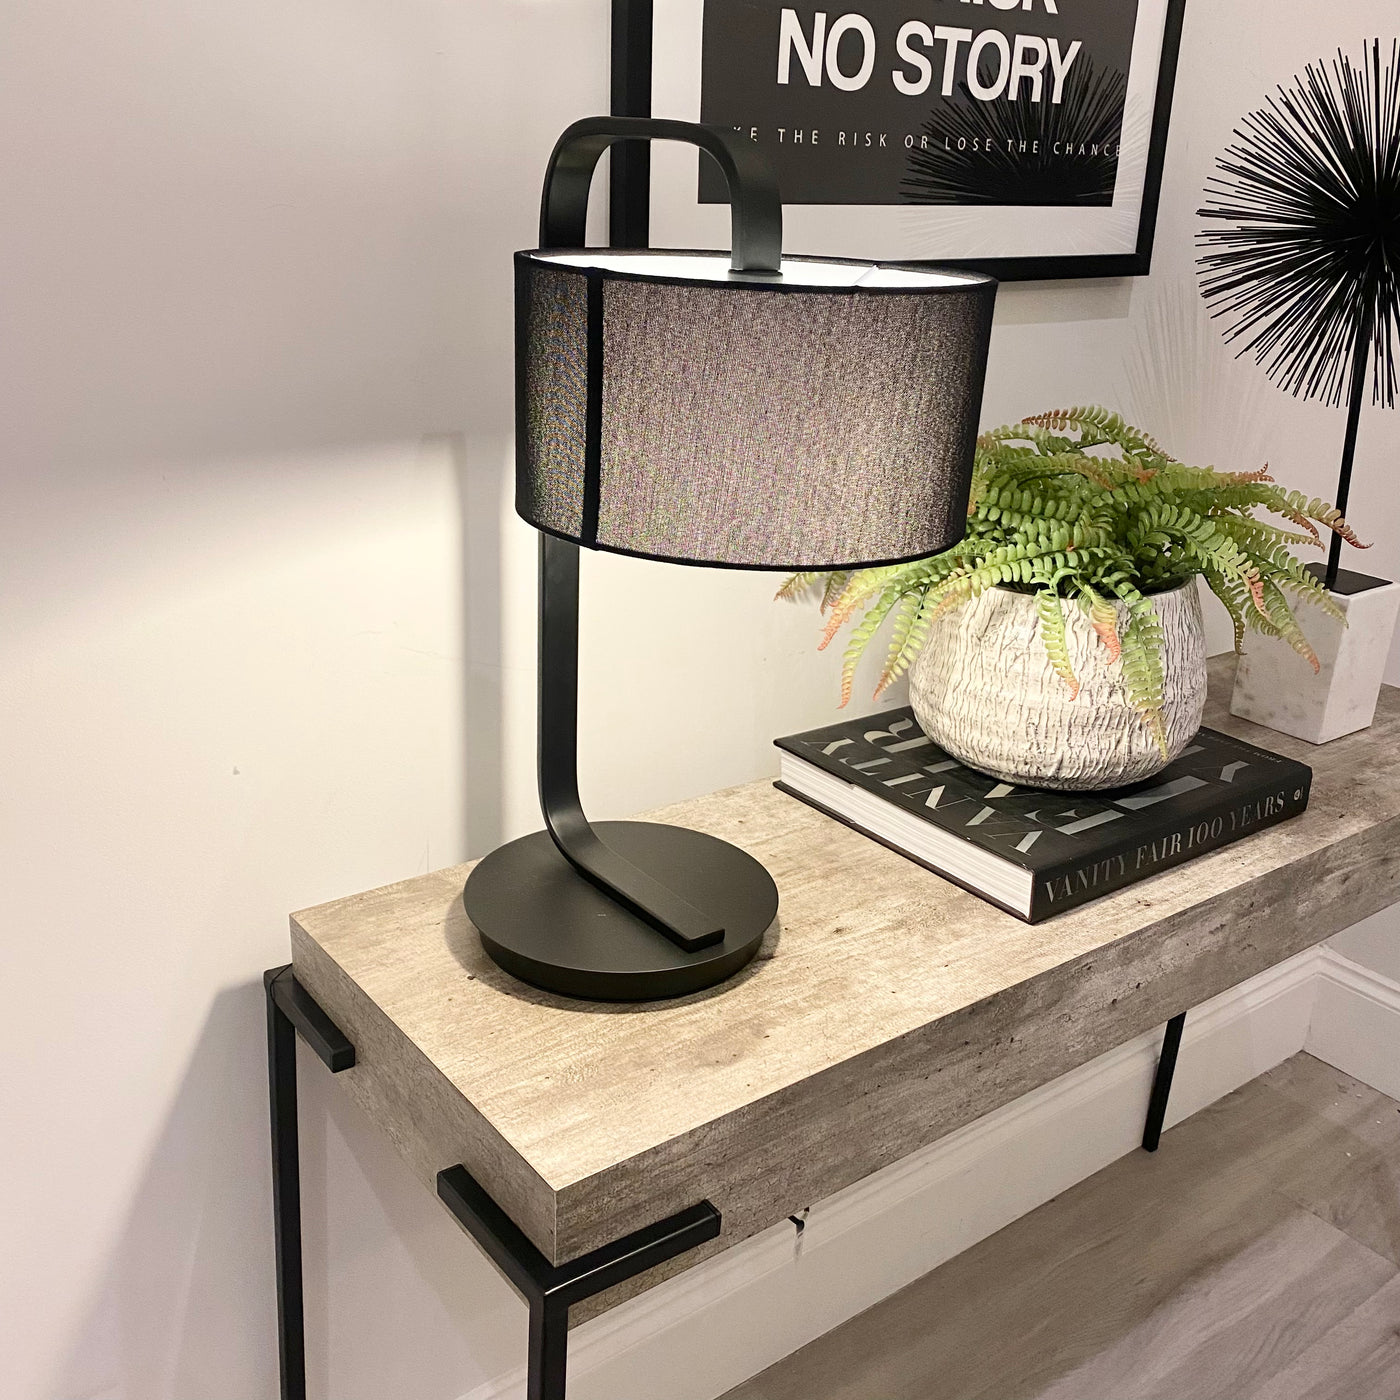 *Ex Display* Concrete Effect Console Table